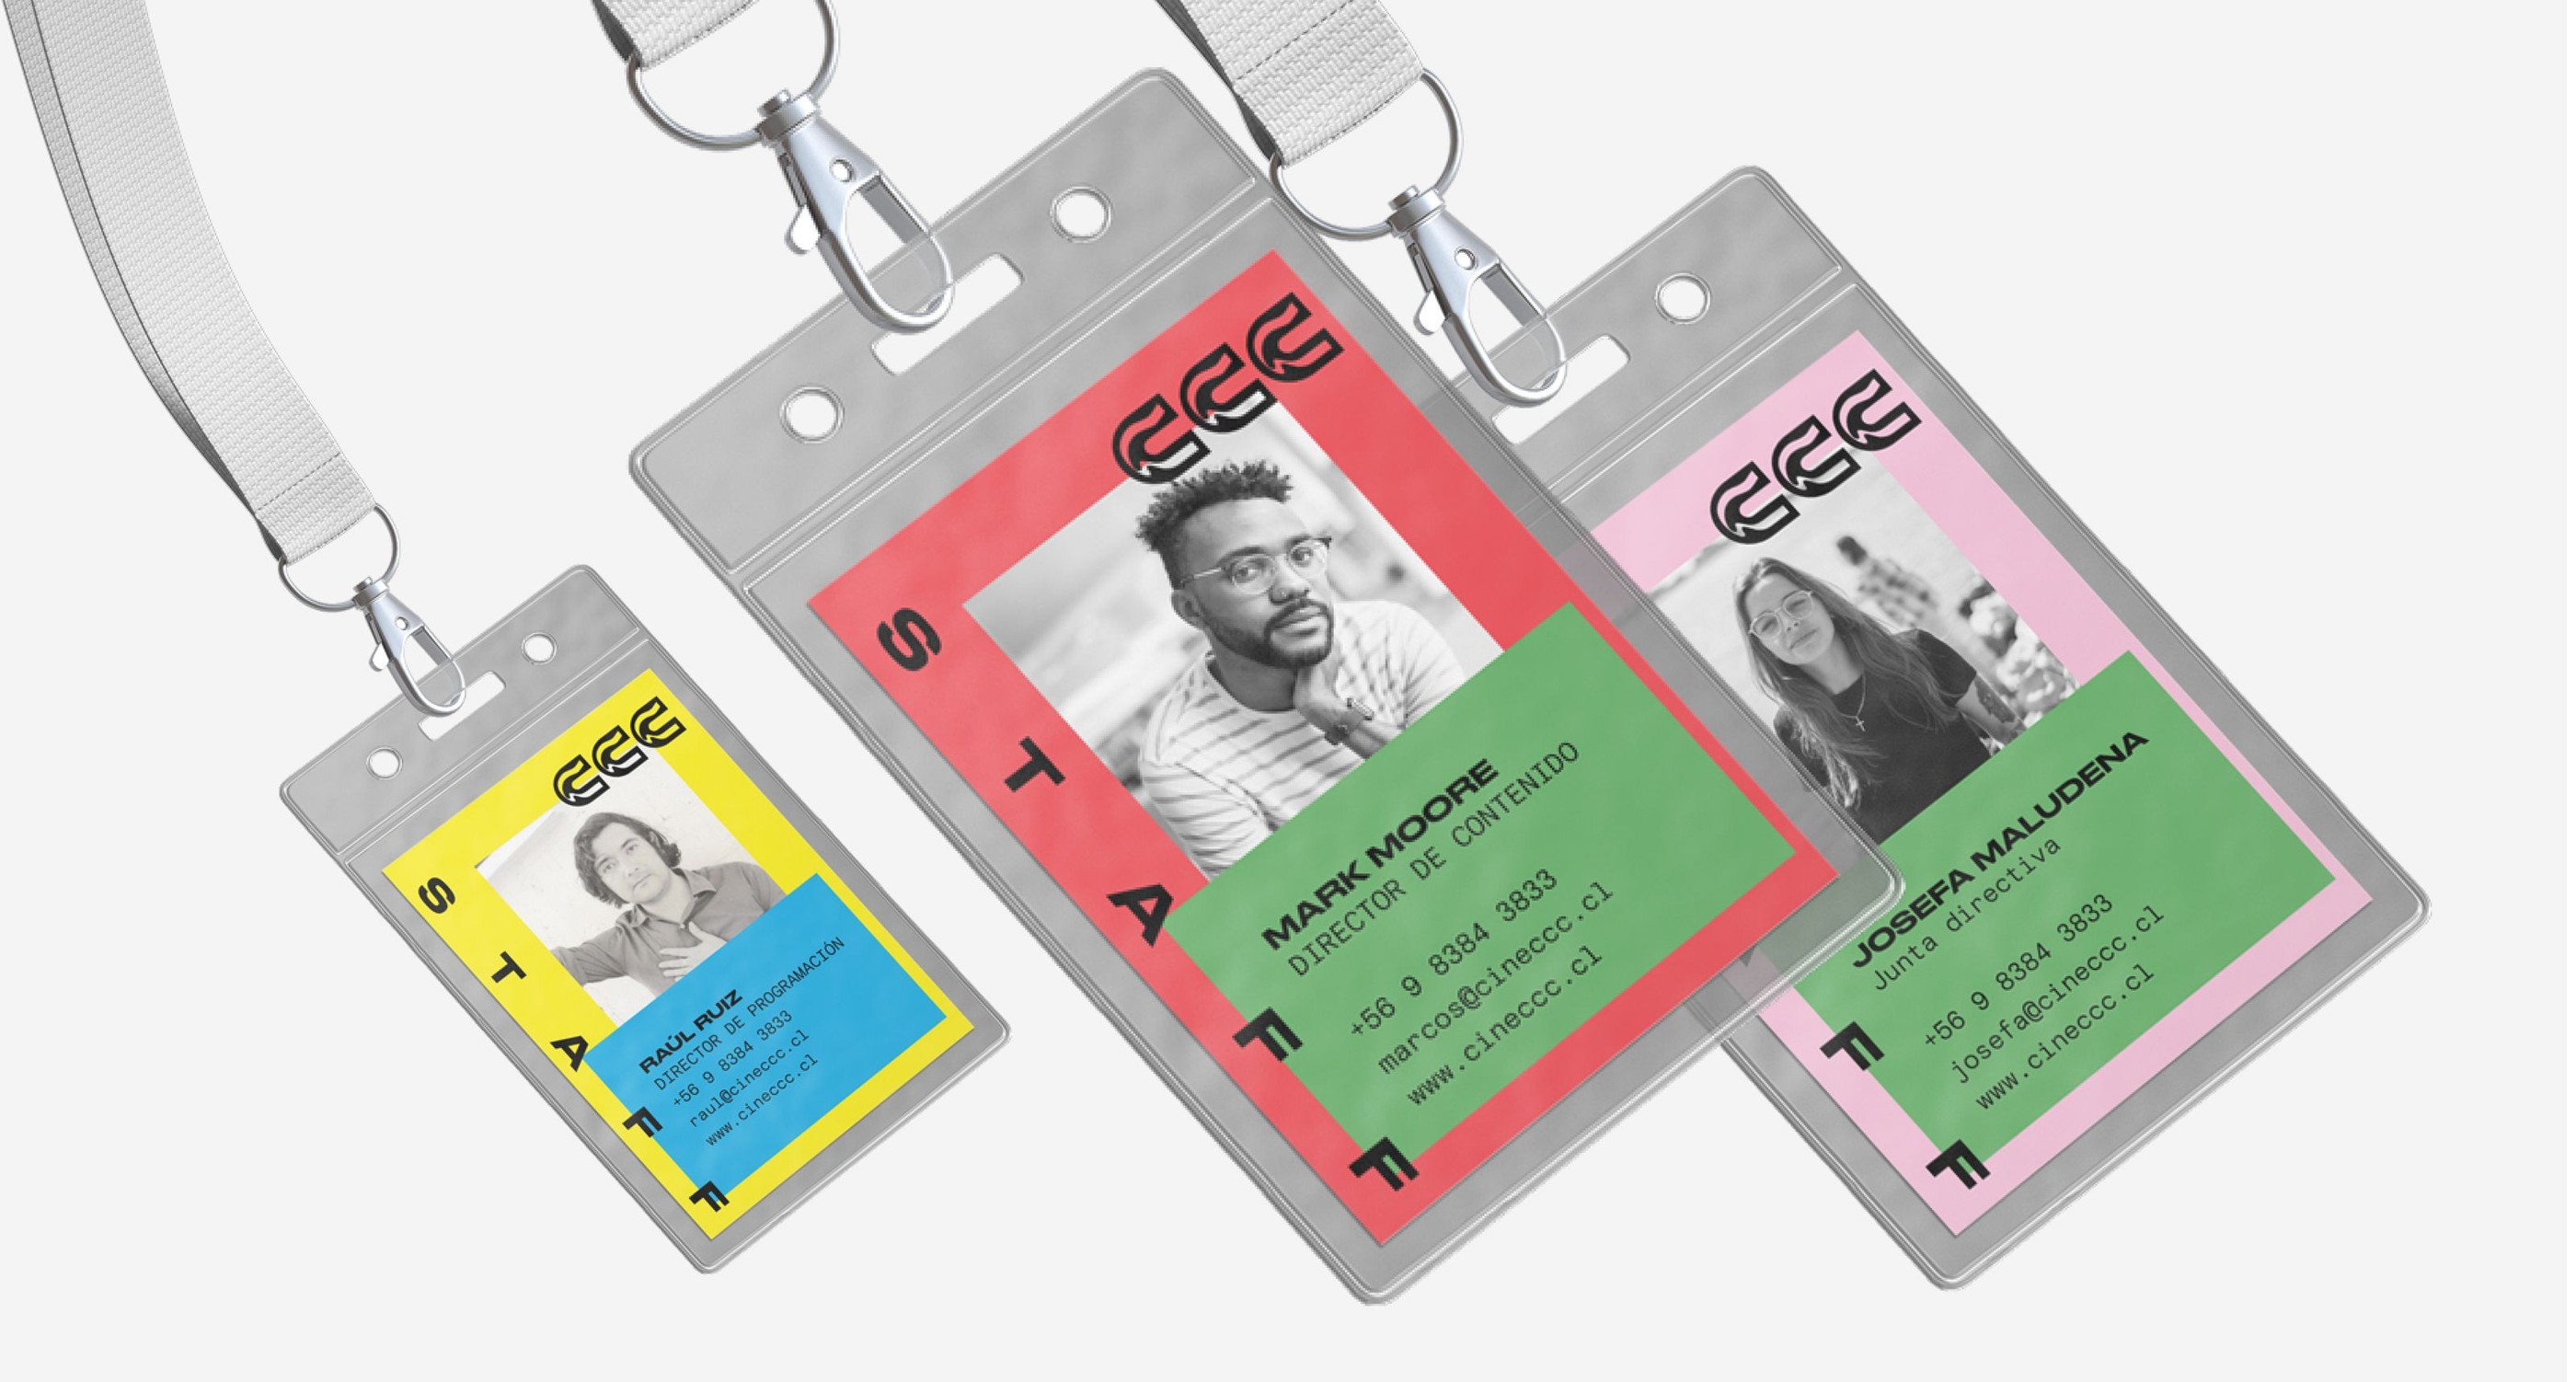 Printed assets like lanyards are also easy to create with the tool.